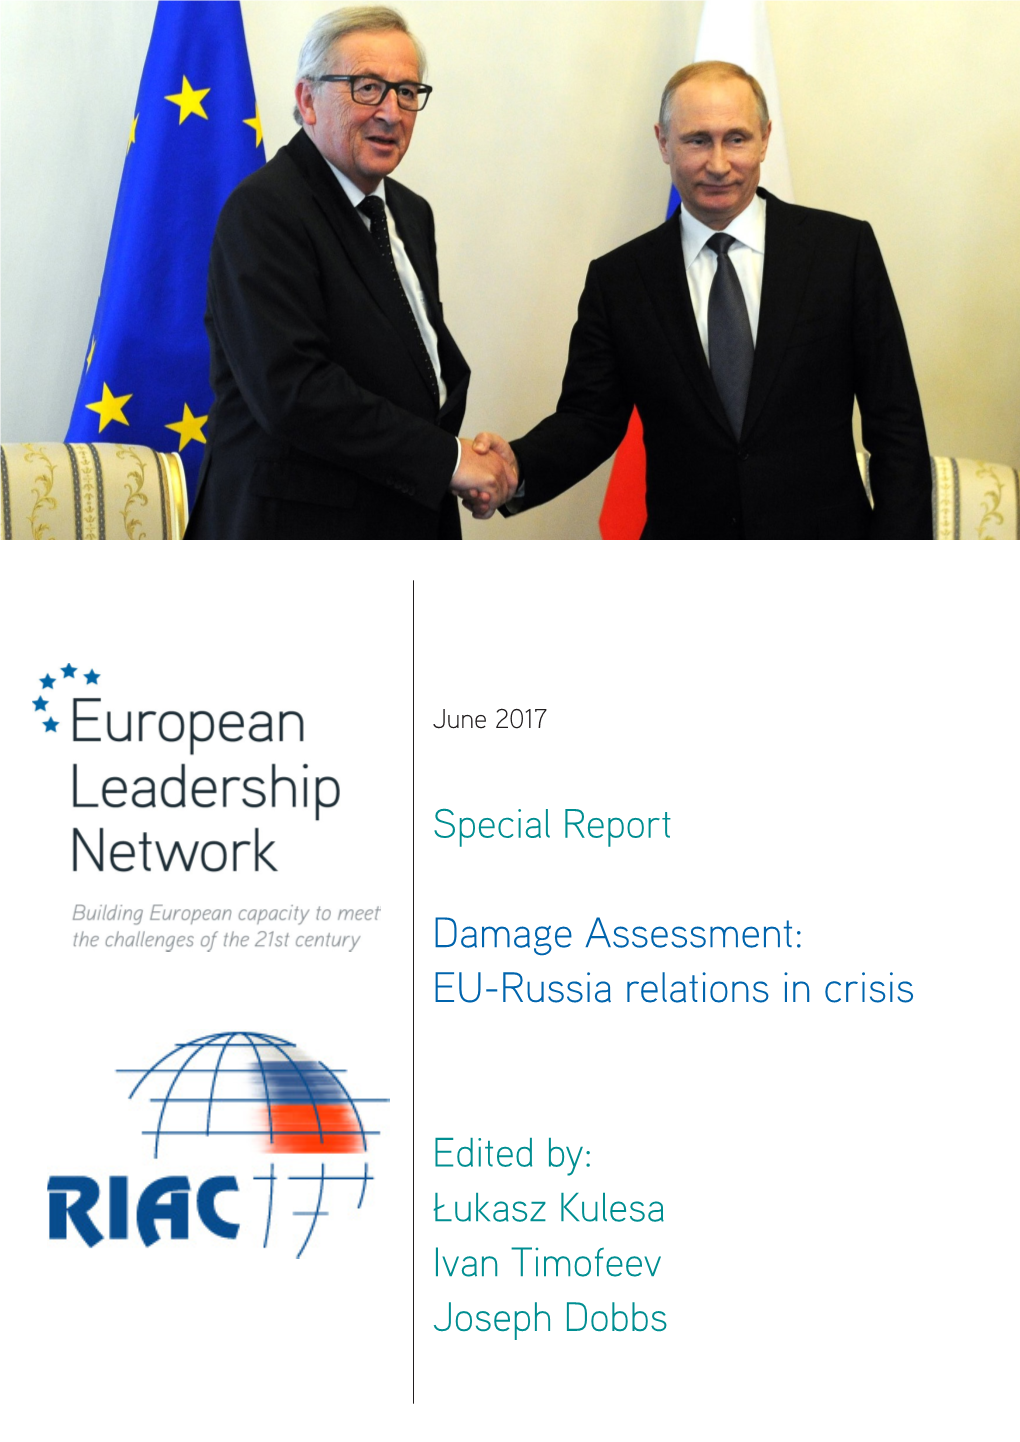 Damage Assessment: EU-Russia Relations in Crisis